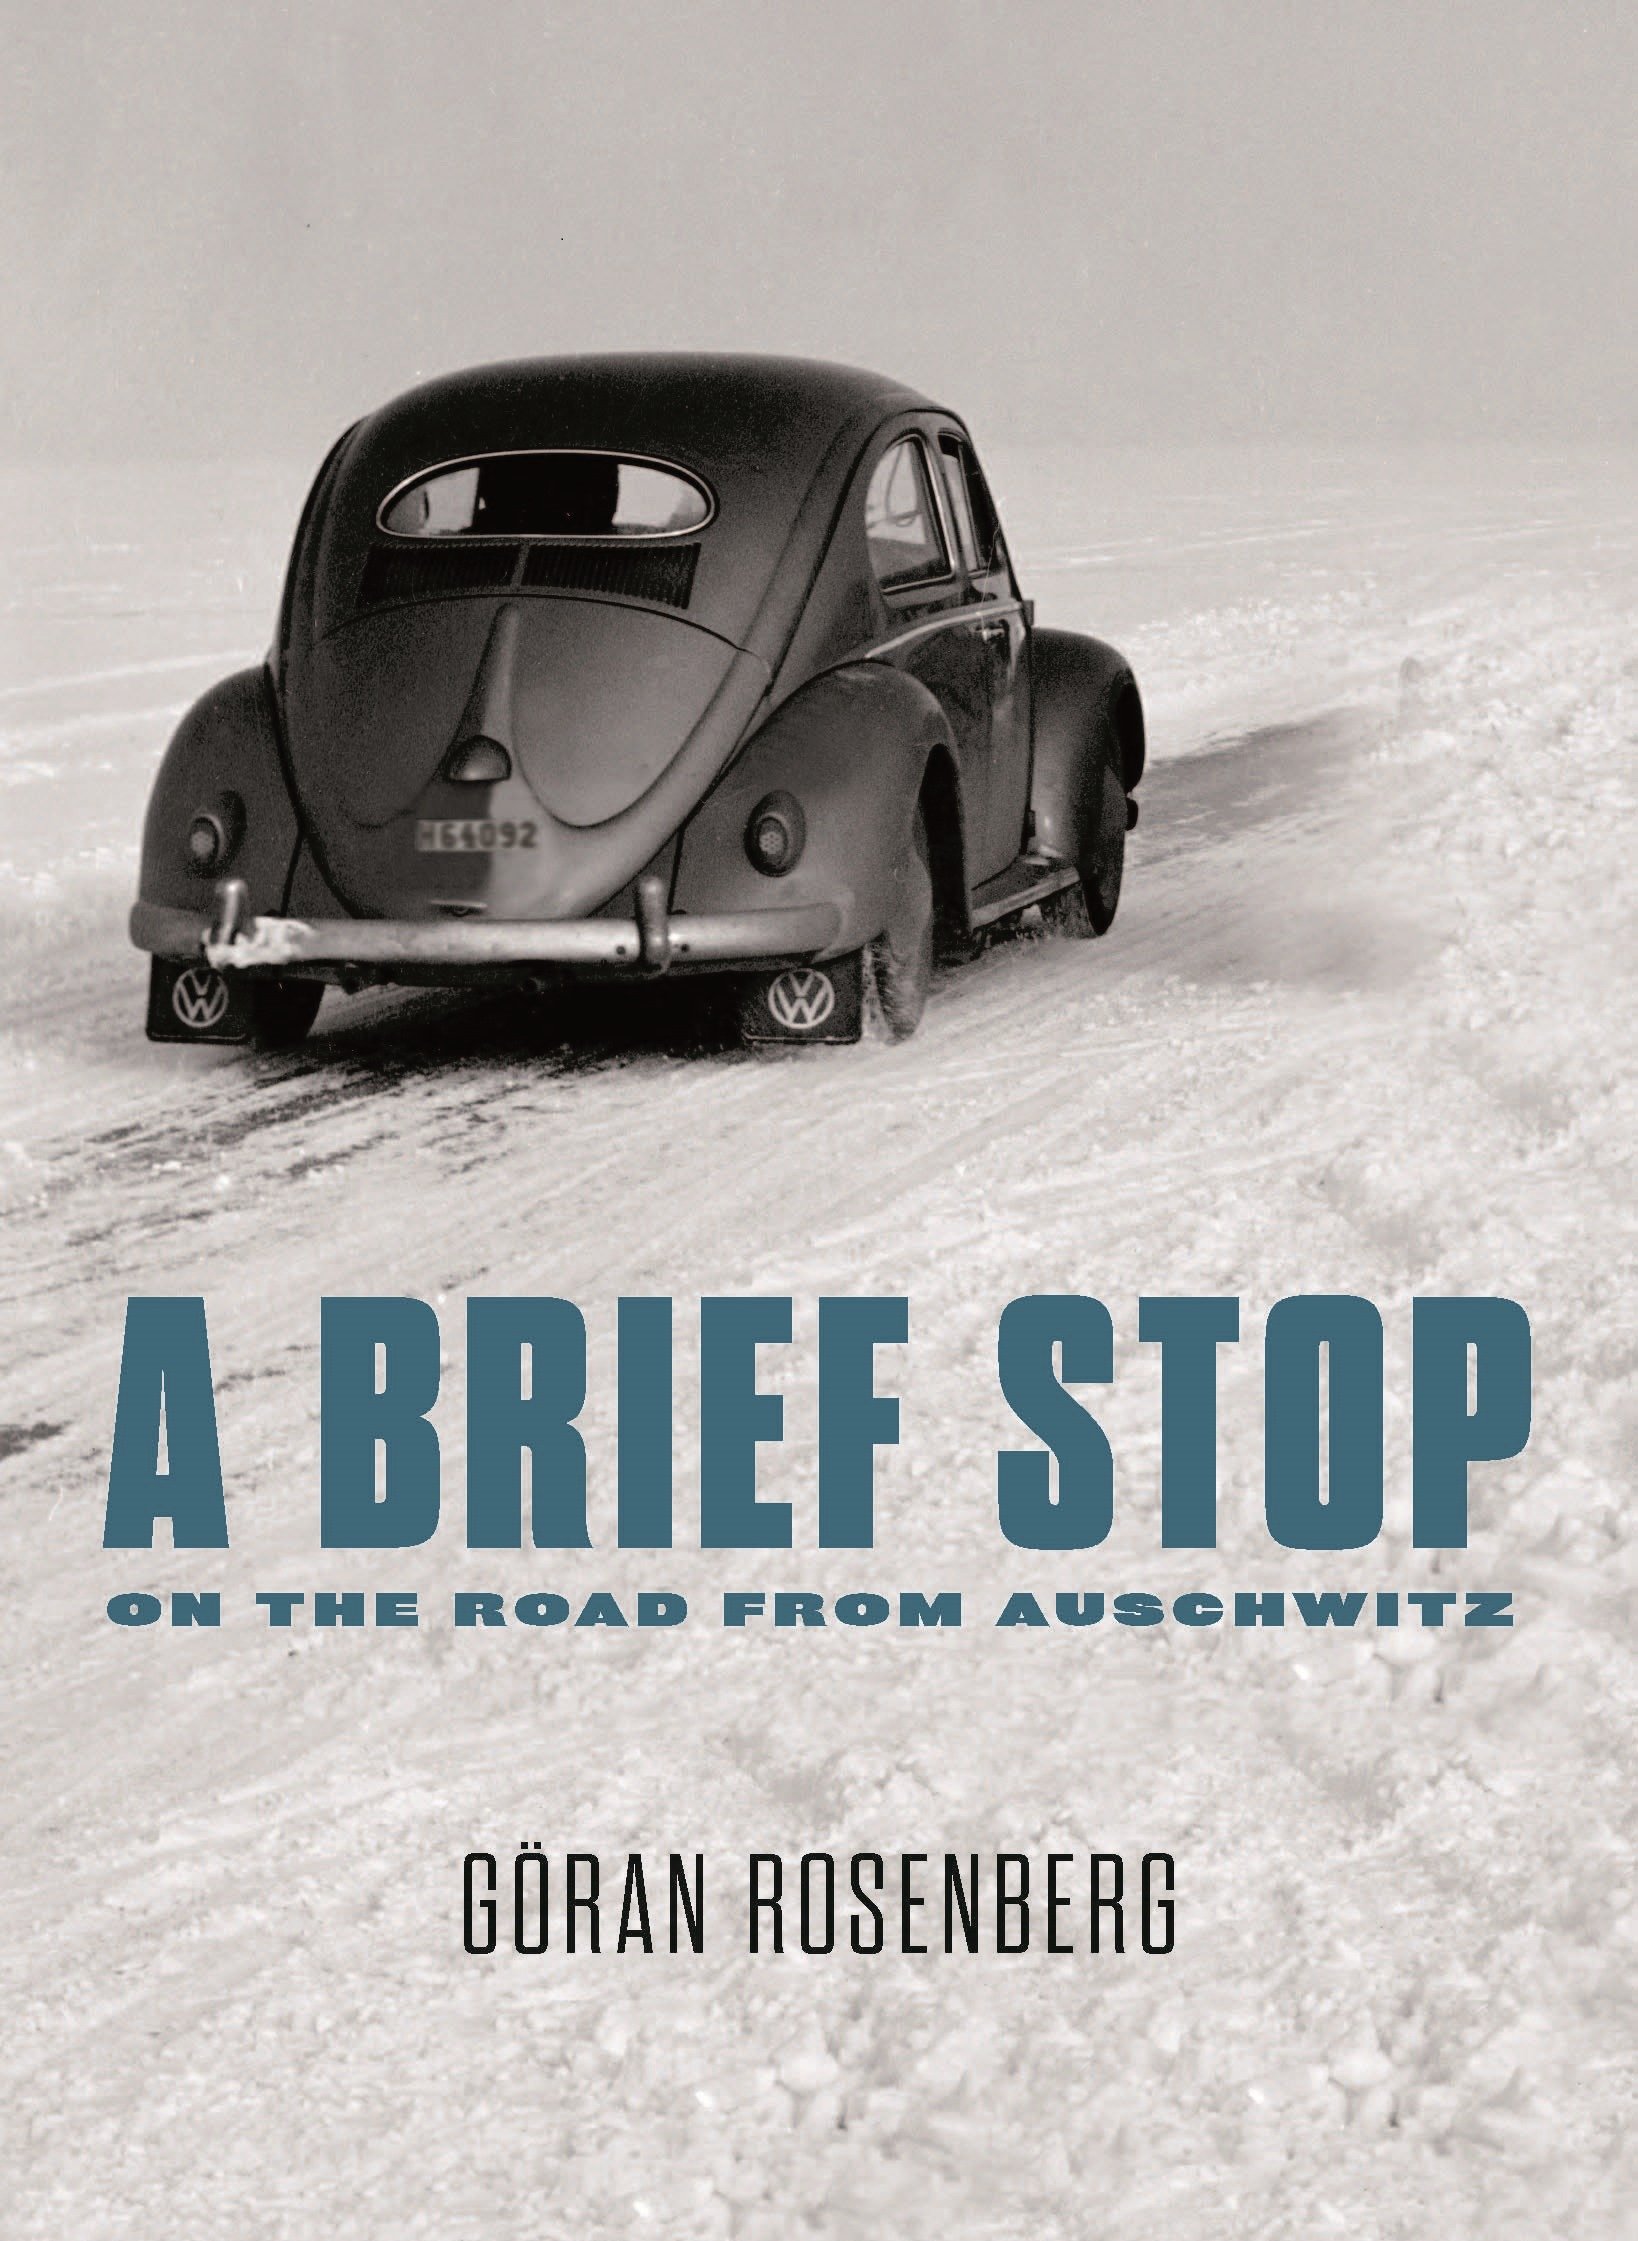 A Brief Stop On the Road From Auschwitz : A Memoir (Hardcover) - image 1 of 1